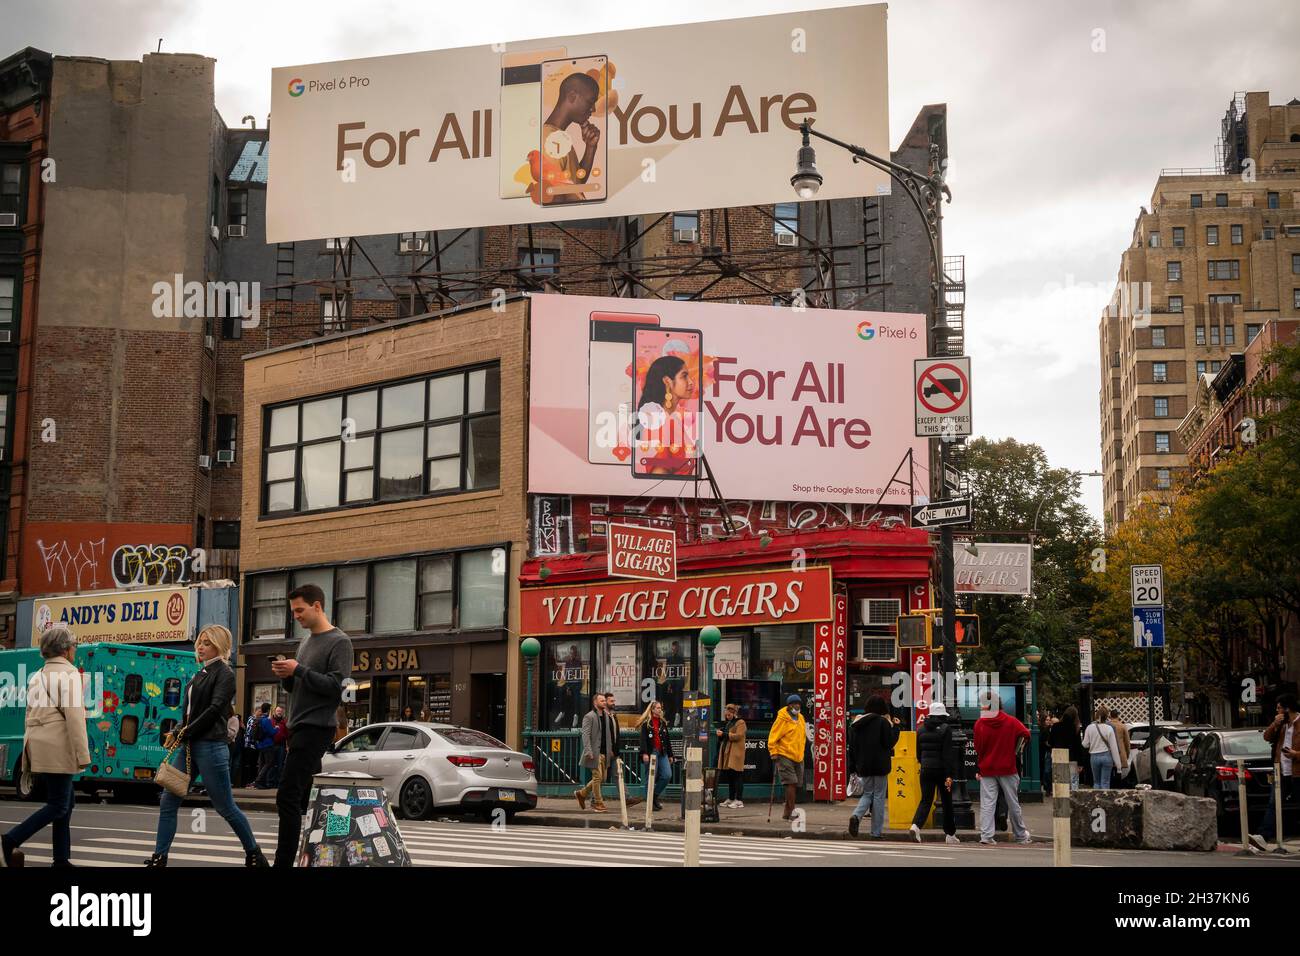 Advertising billboards for Google’s Pixel Pro 6 smartphone in Sheridan Square in Greenwich Village in New York on Sunday, October 24, 2021. (© Richard B. Levine) Stock Photo